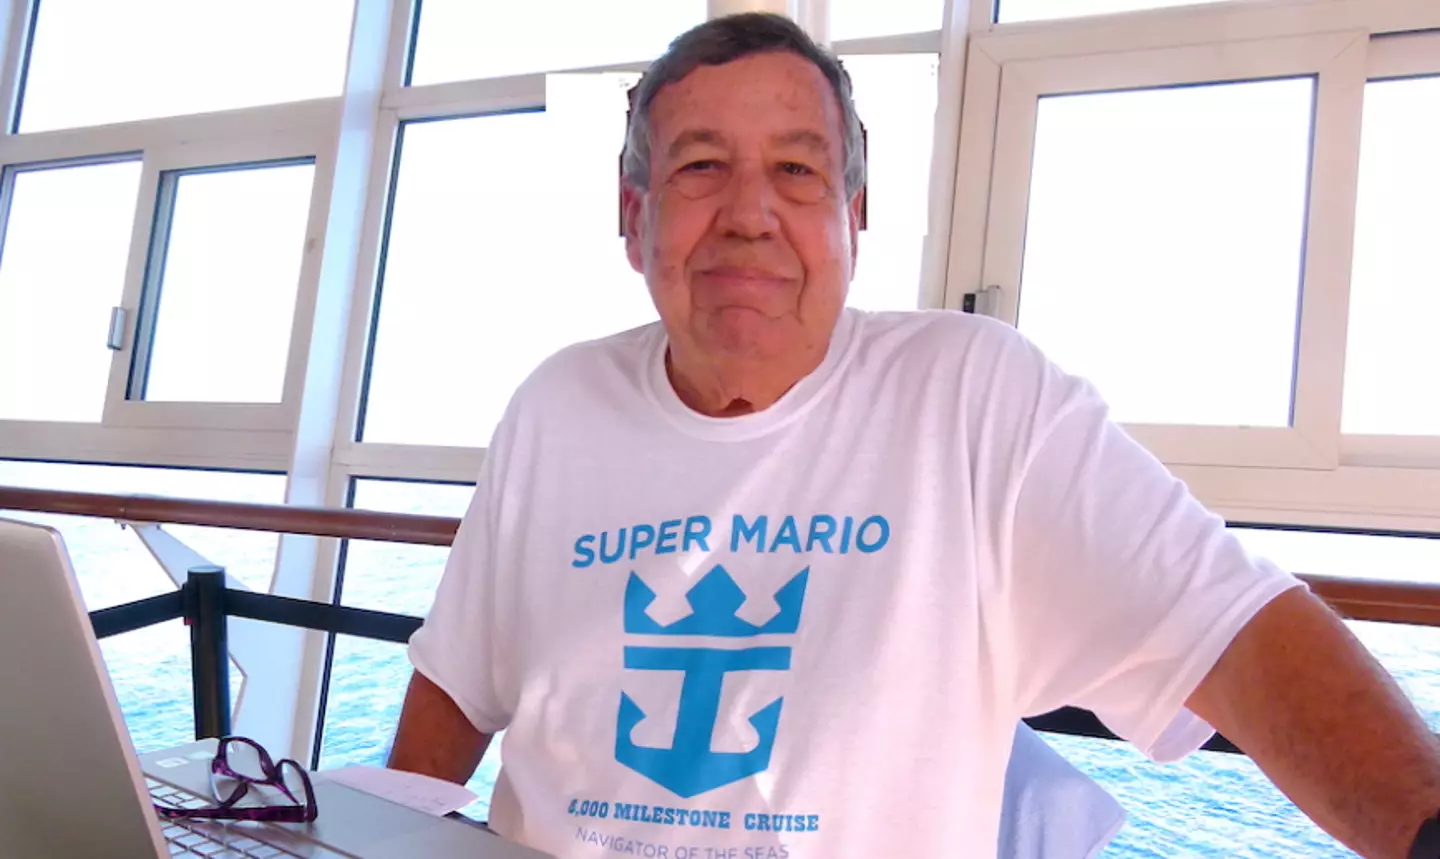 Super Mario has no plans to give up his cruise lifestyle anytime soon.